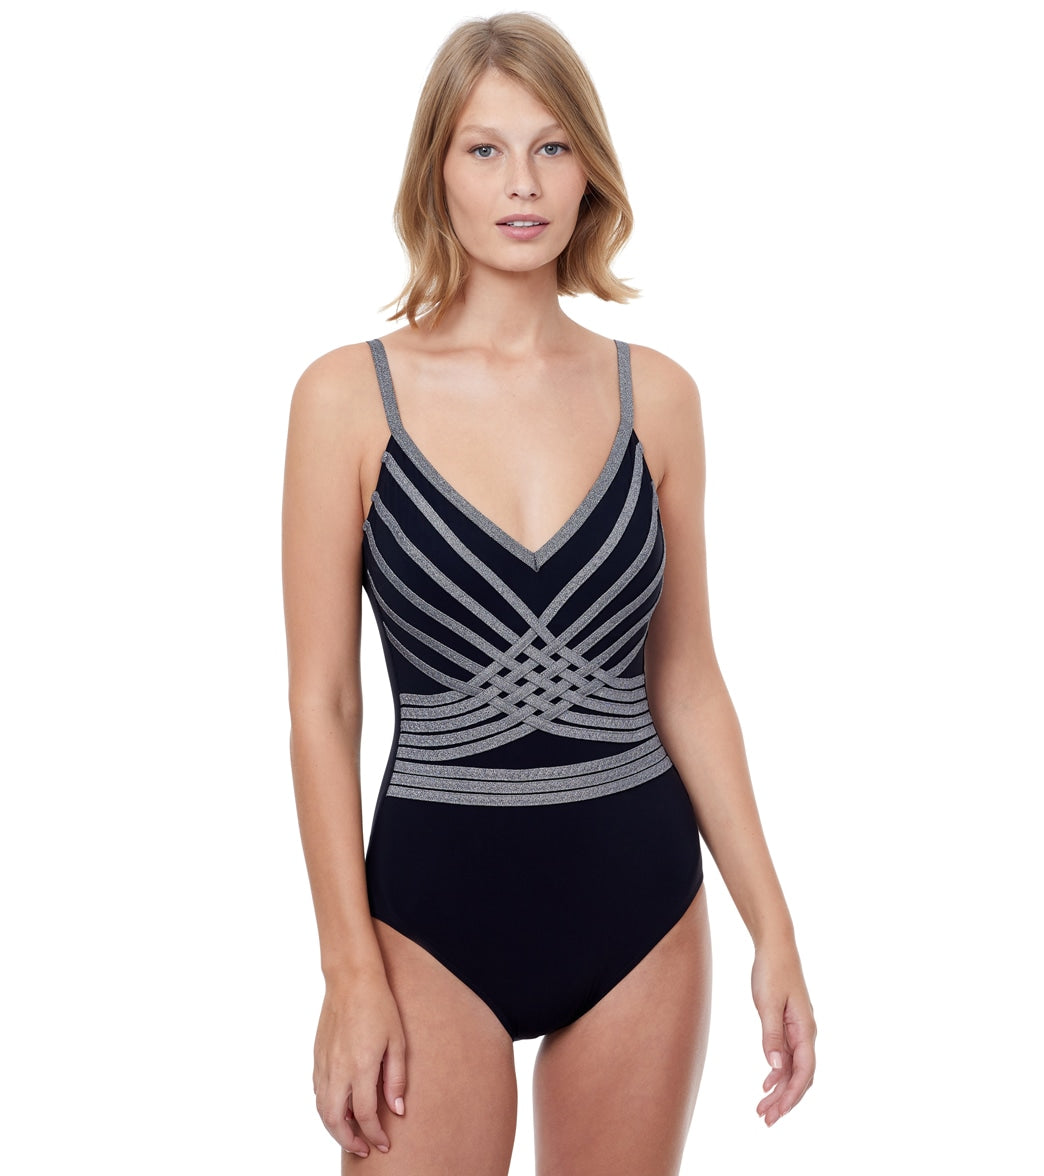 Gottex Women's Divine Embroidery One Piece Swimsuit at